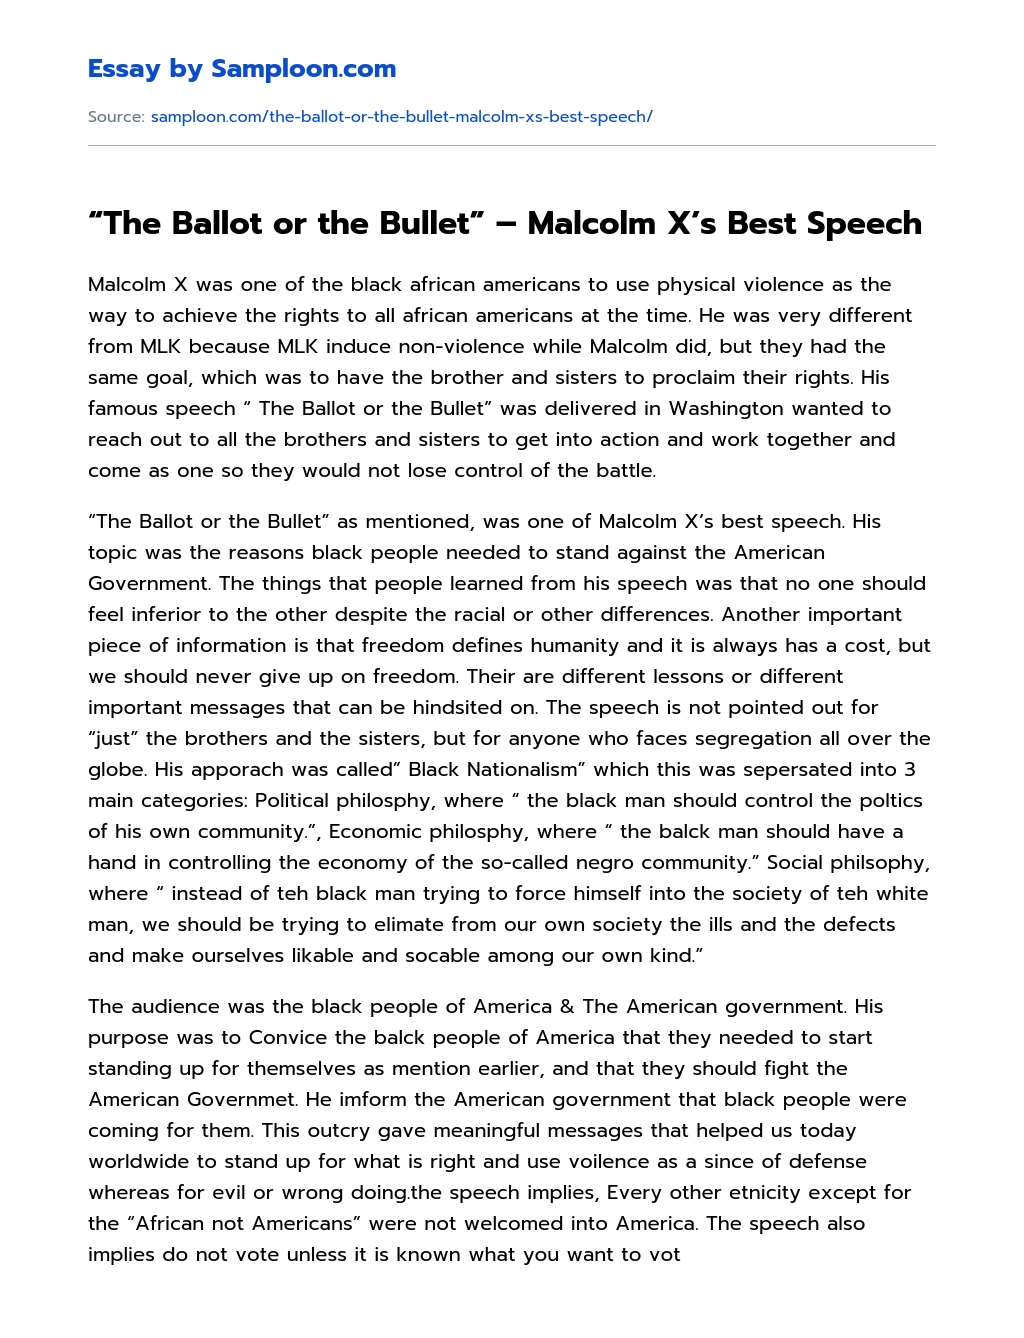 “The Ballot or the Bullet” – Malcolm X’s Best Speech essay